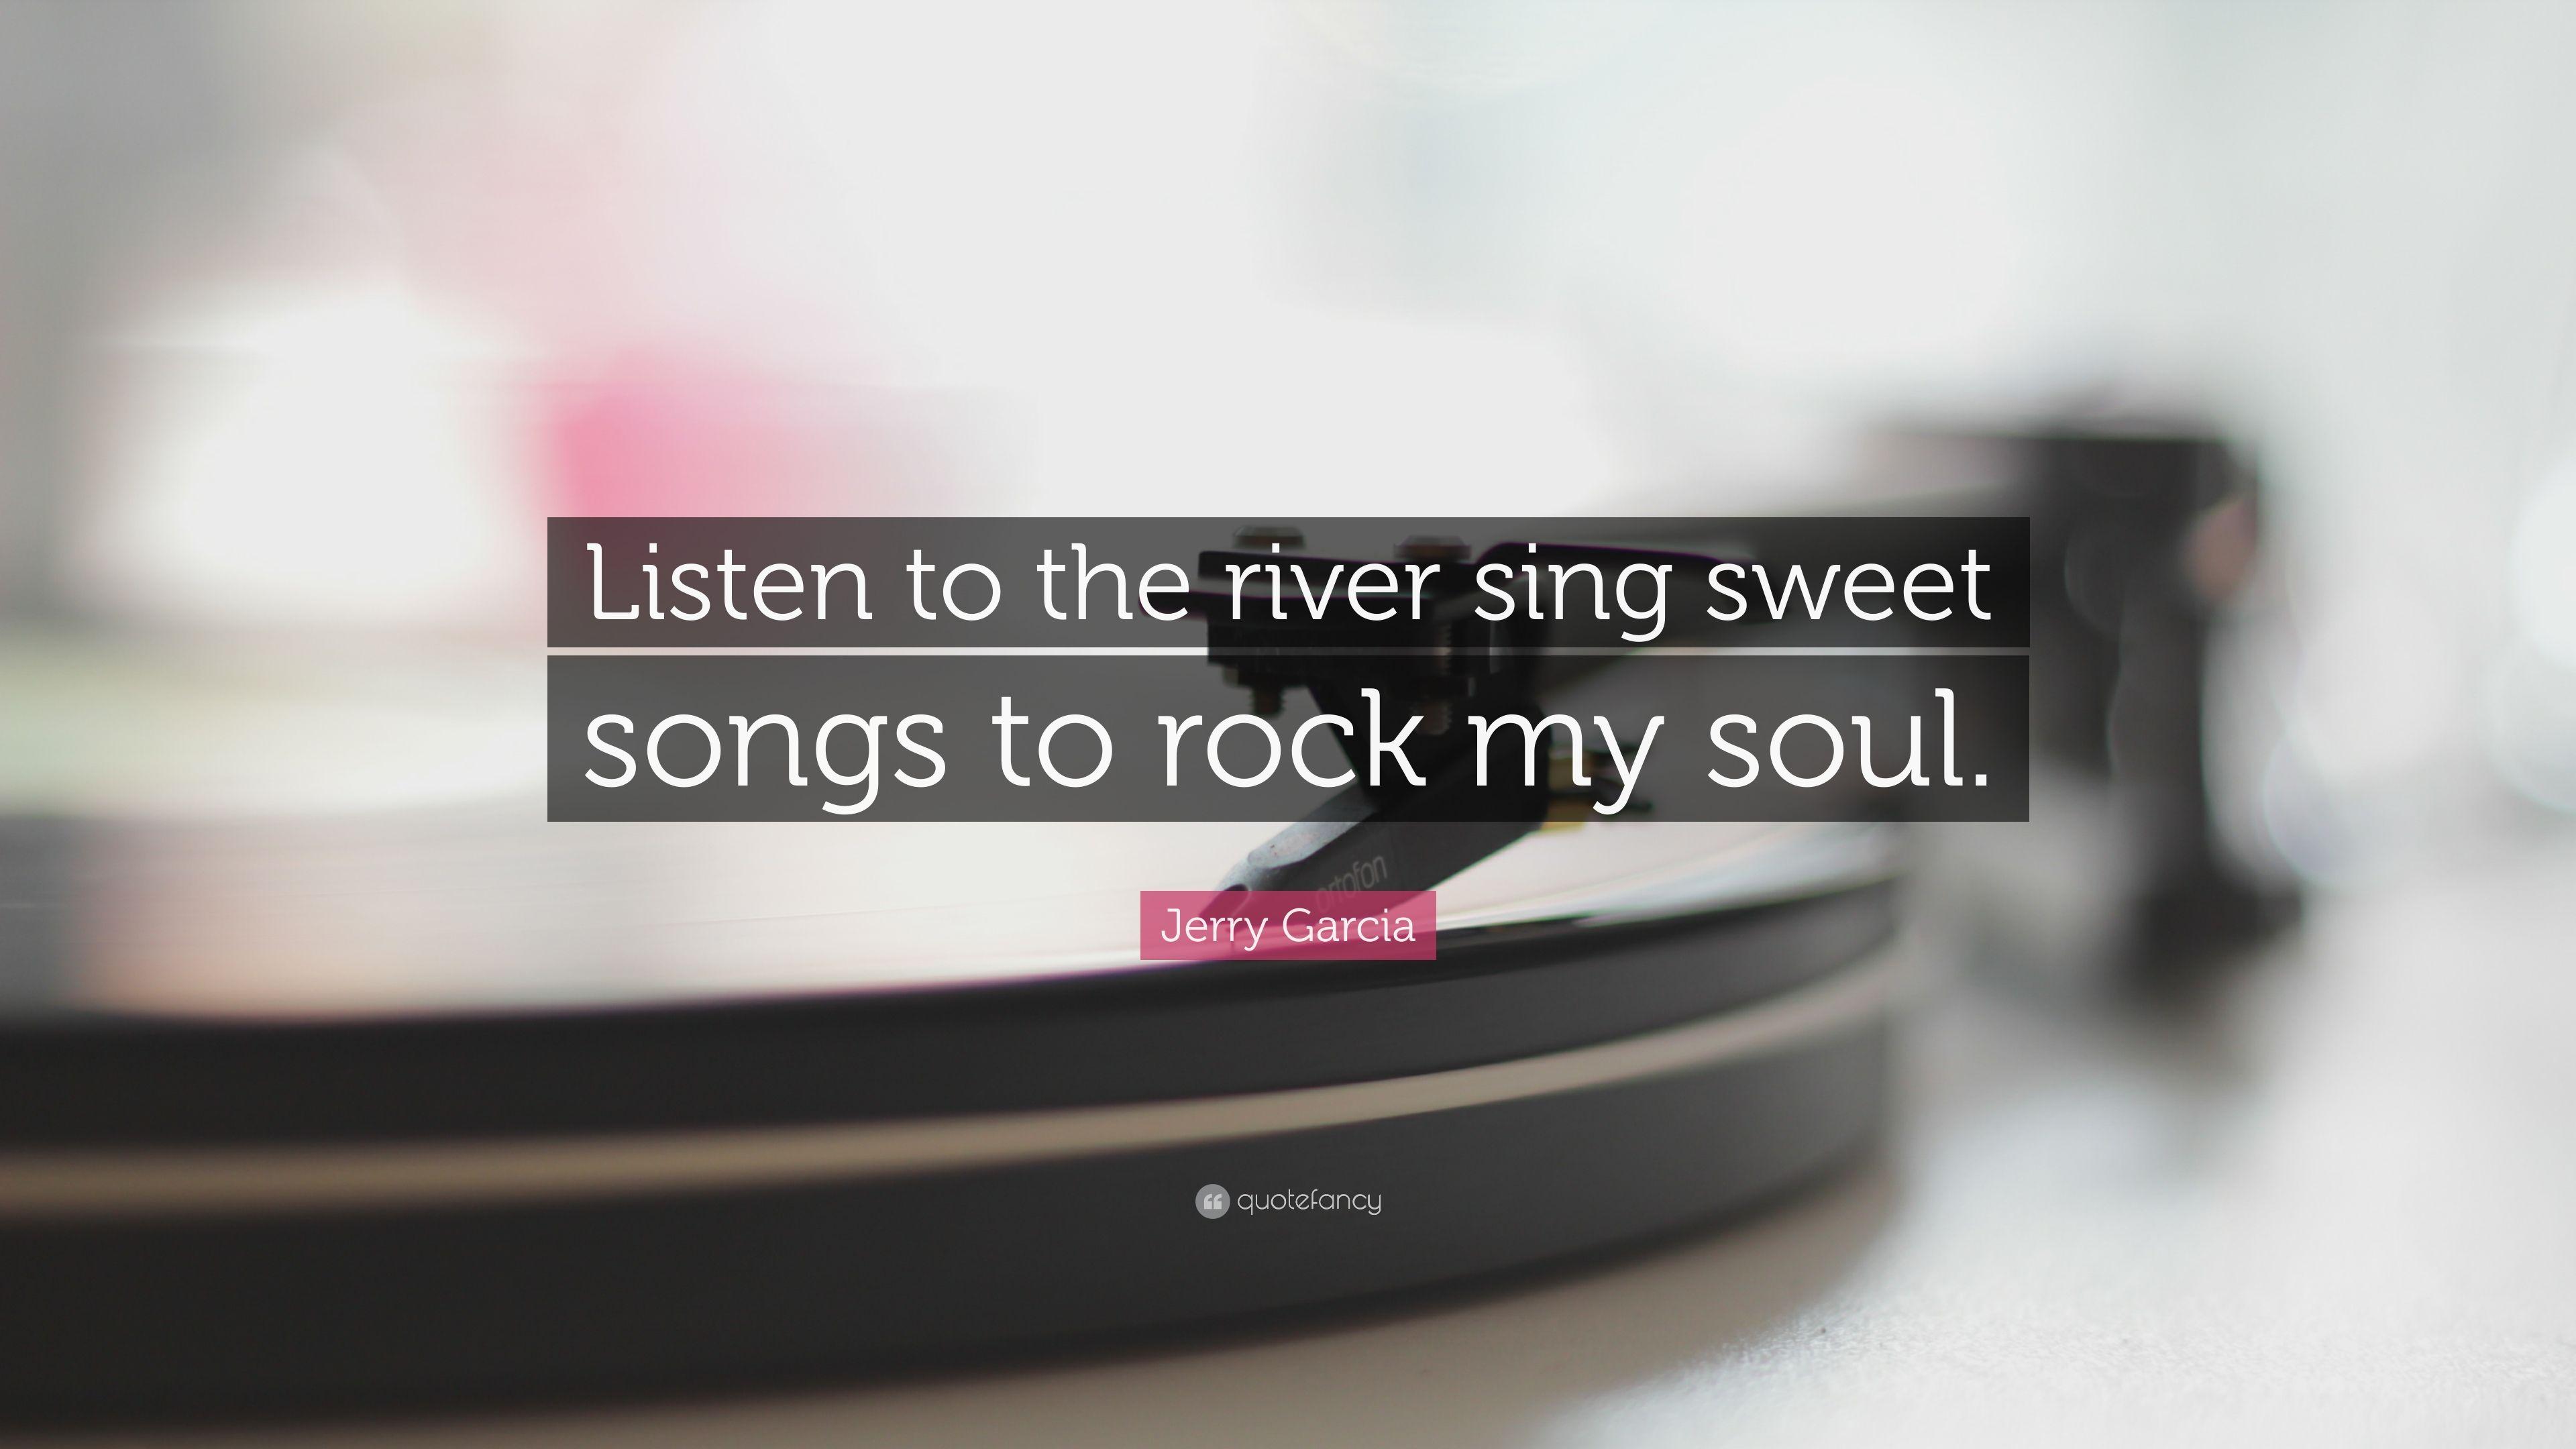 Jerry Garcia Quote: “Listen to the river sing sweet songs to rock